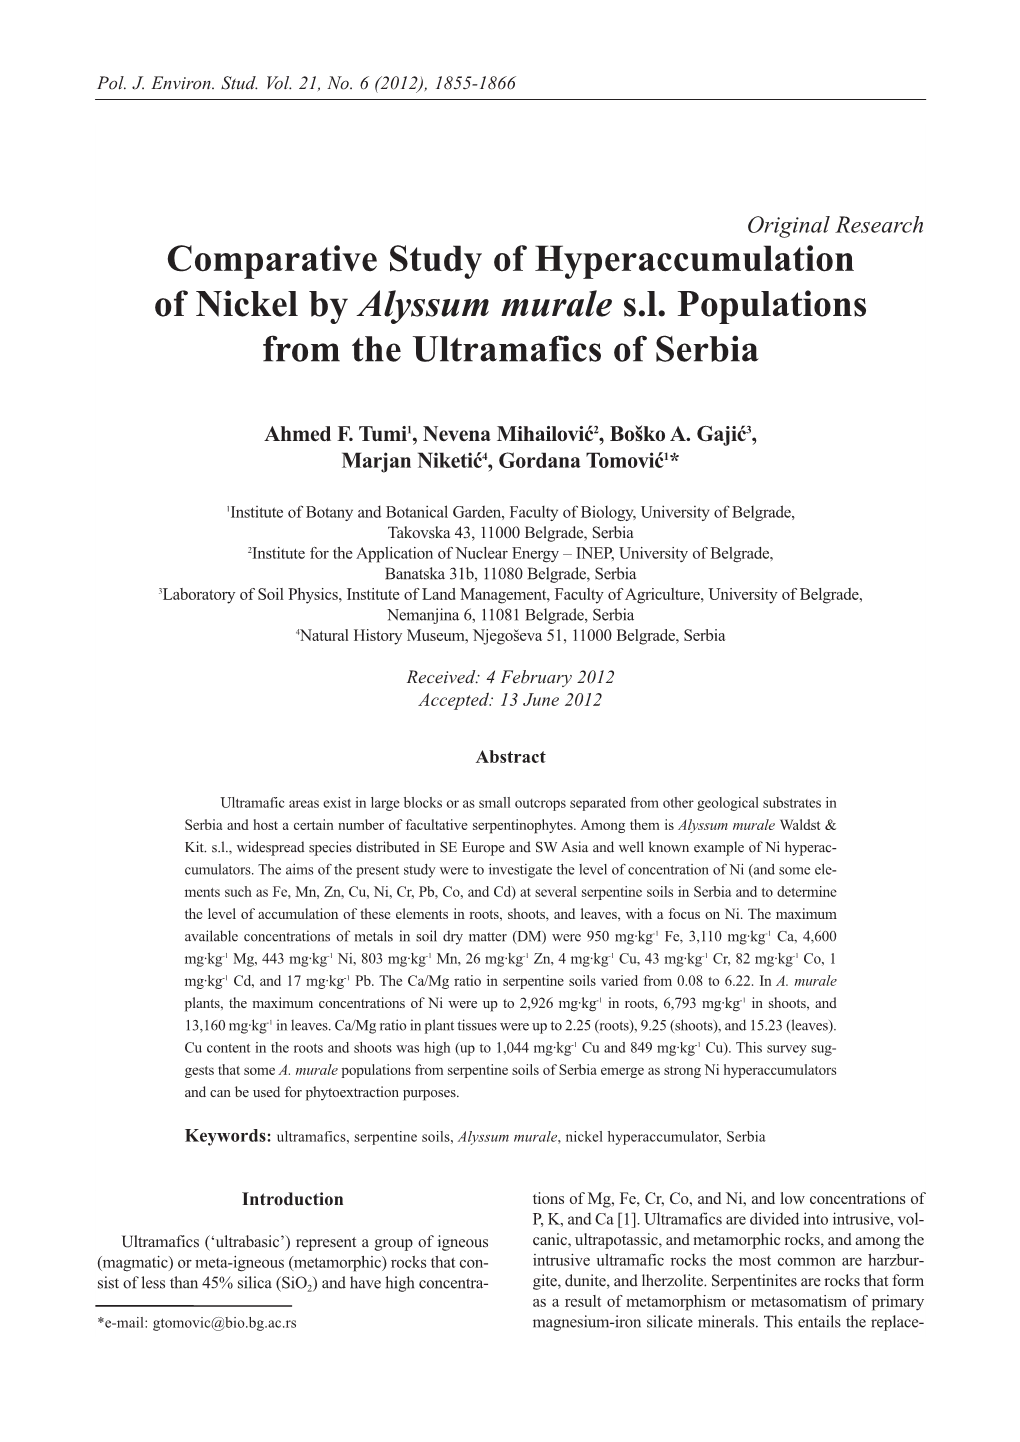 Comparative Study of Hyperaccumulation of Nickel by Alyssum Murale S.L